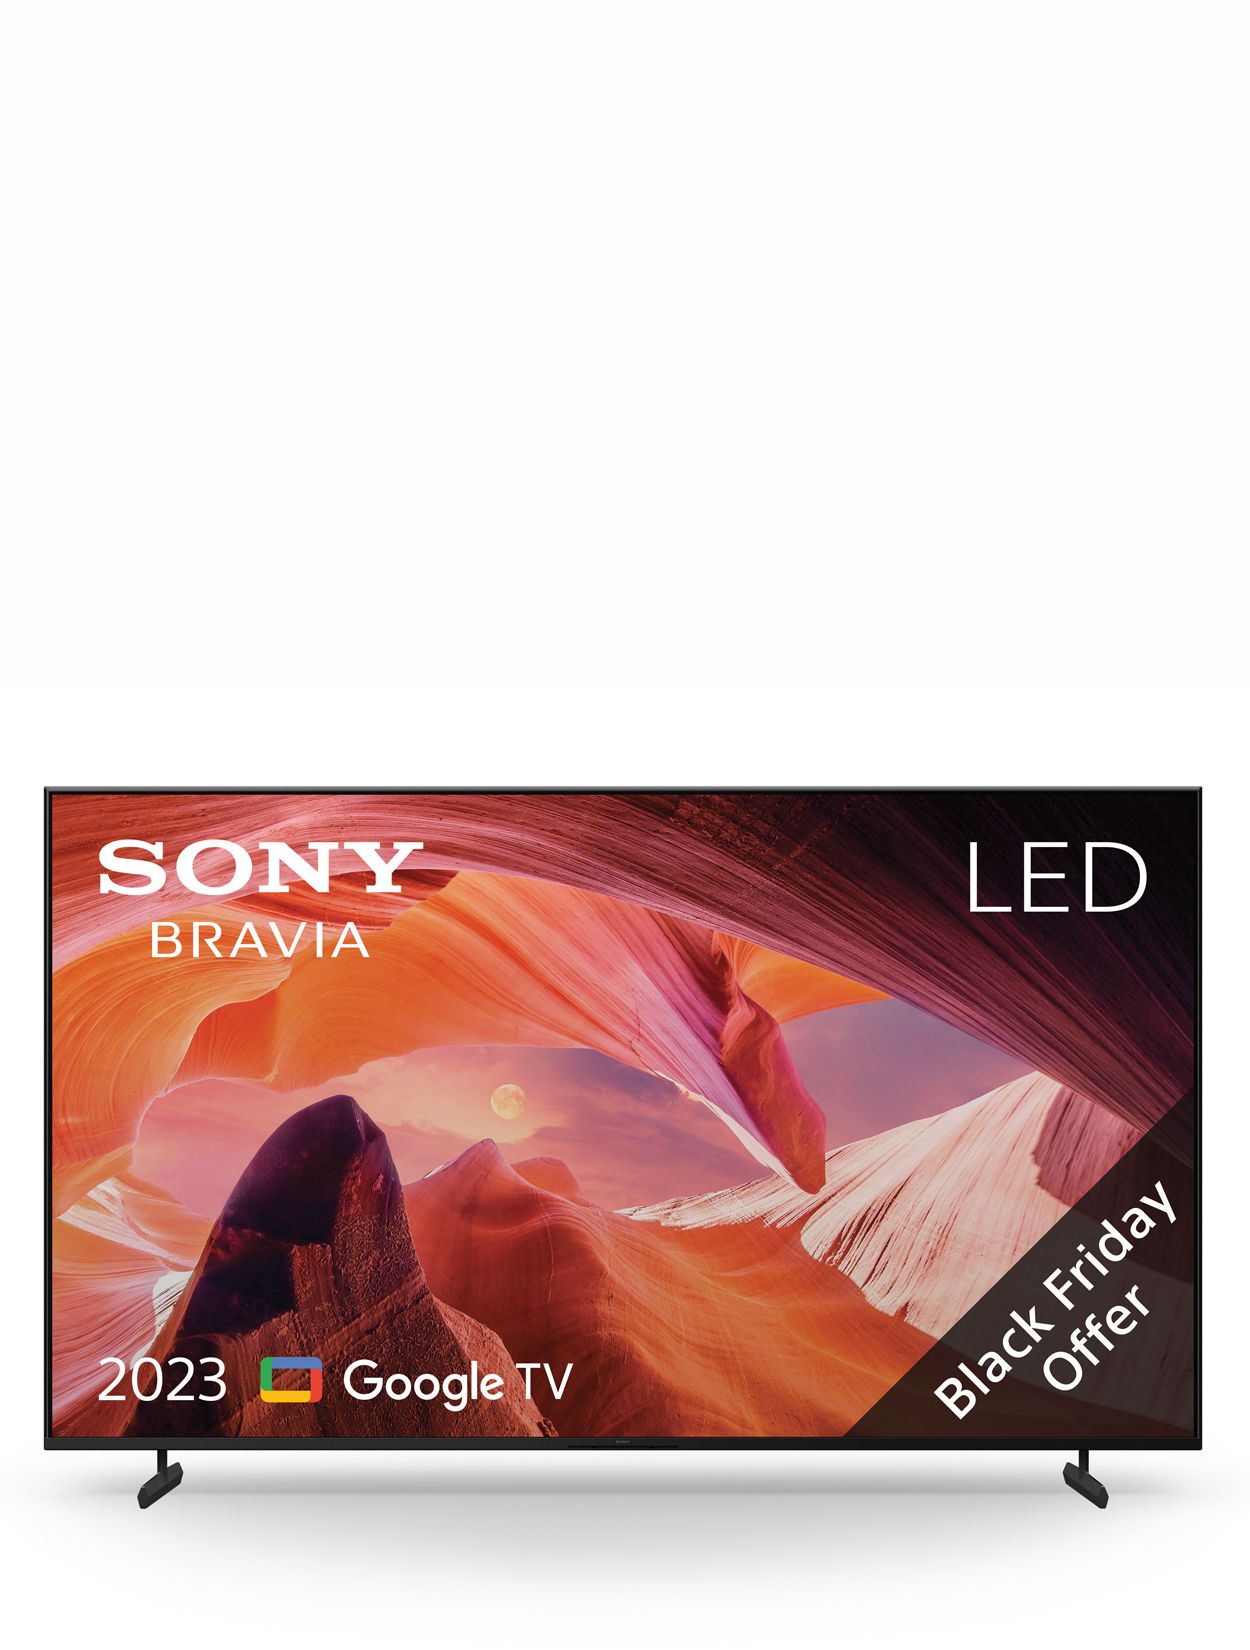 Sony Bravia KD85X80L (2023) LED HDR 4K Ultra HD Smart Google TV, 85 inch with Youview/Freesat HD & Dolby Atmos, Black